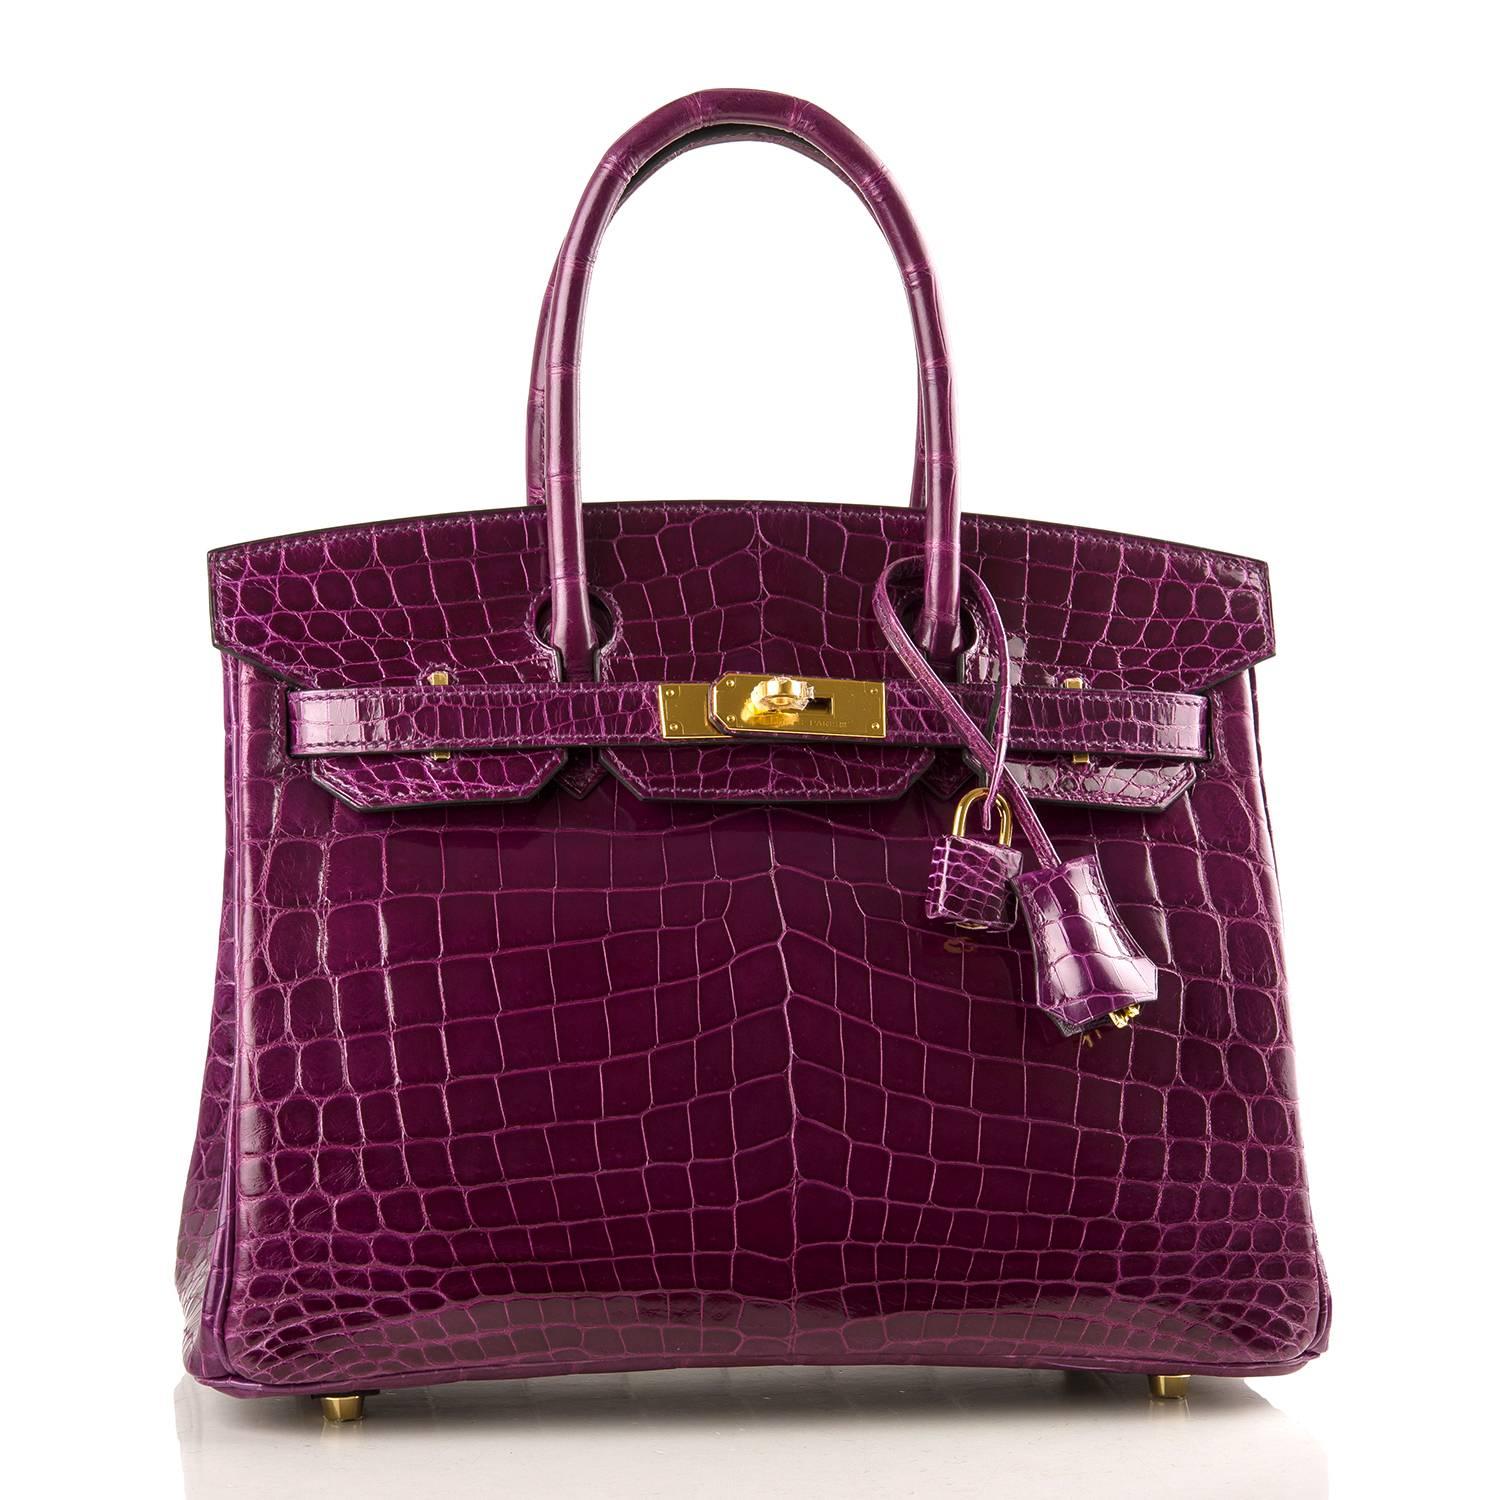 Hermes Cassis Birkin 30cm of shiny niloticus crocodile with gold hardware.

This Birkin has tonal stitching, a front toggle closure, a clochette with lock and two keys, and double rolled handles.

The interior is lined with Cassis chevre and has